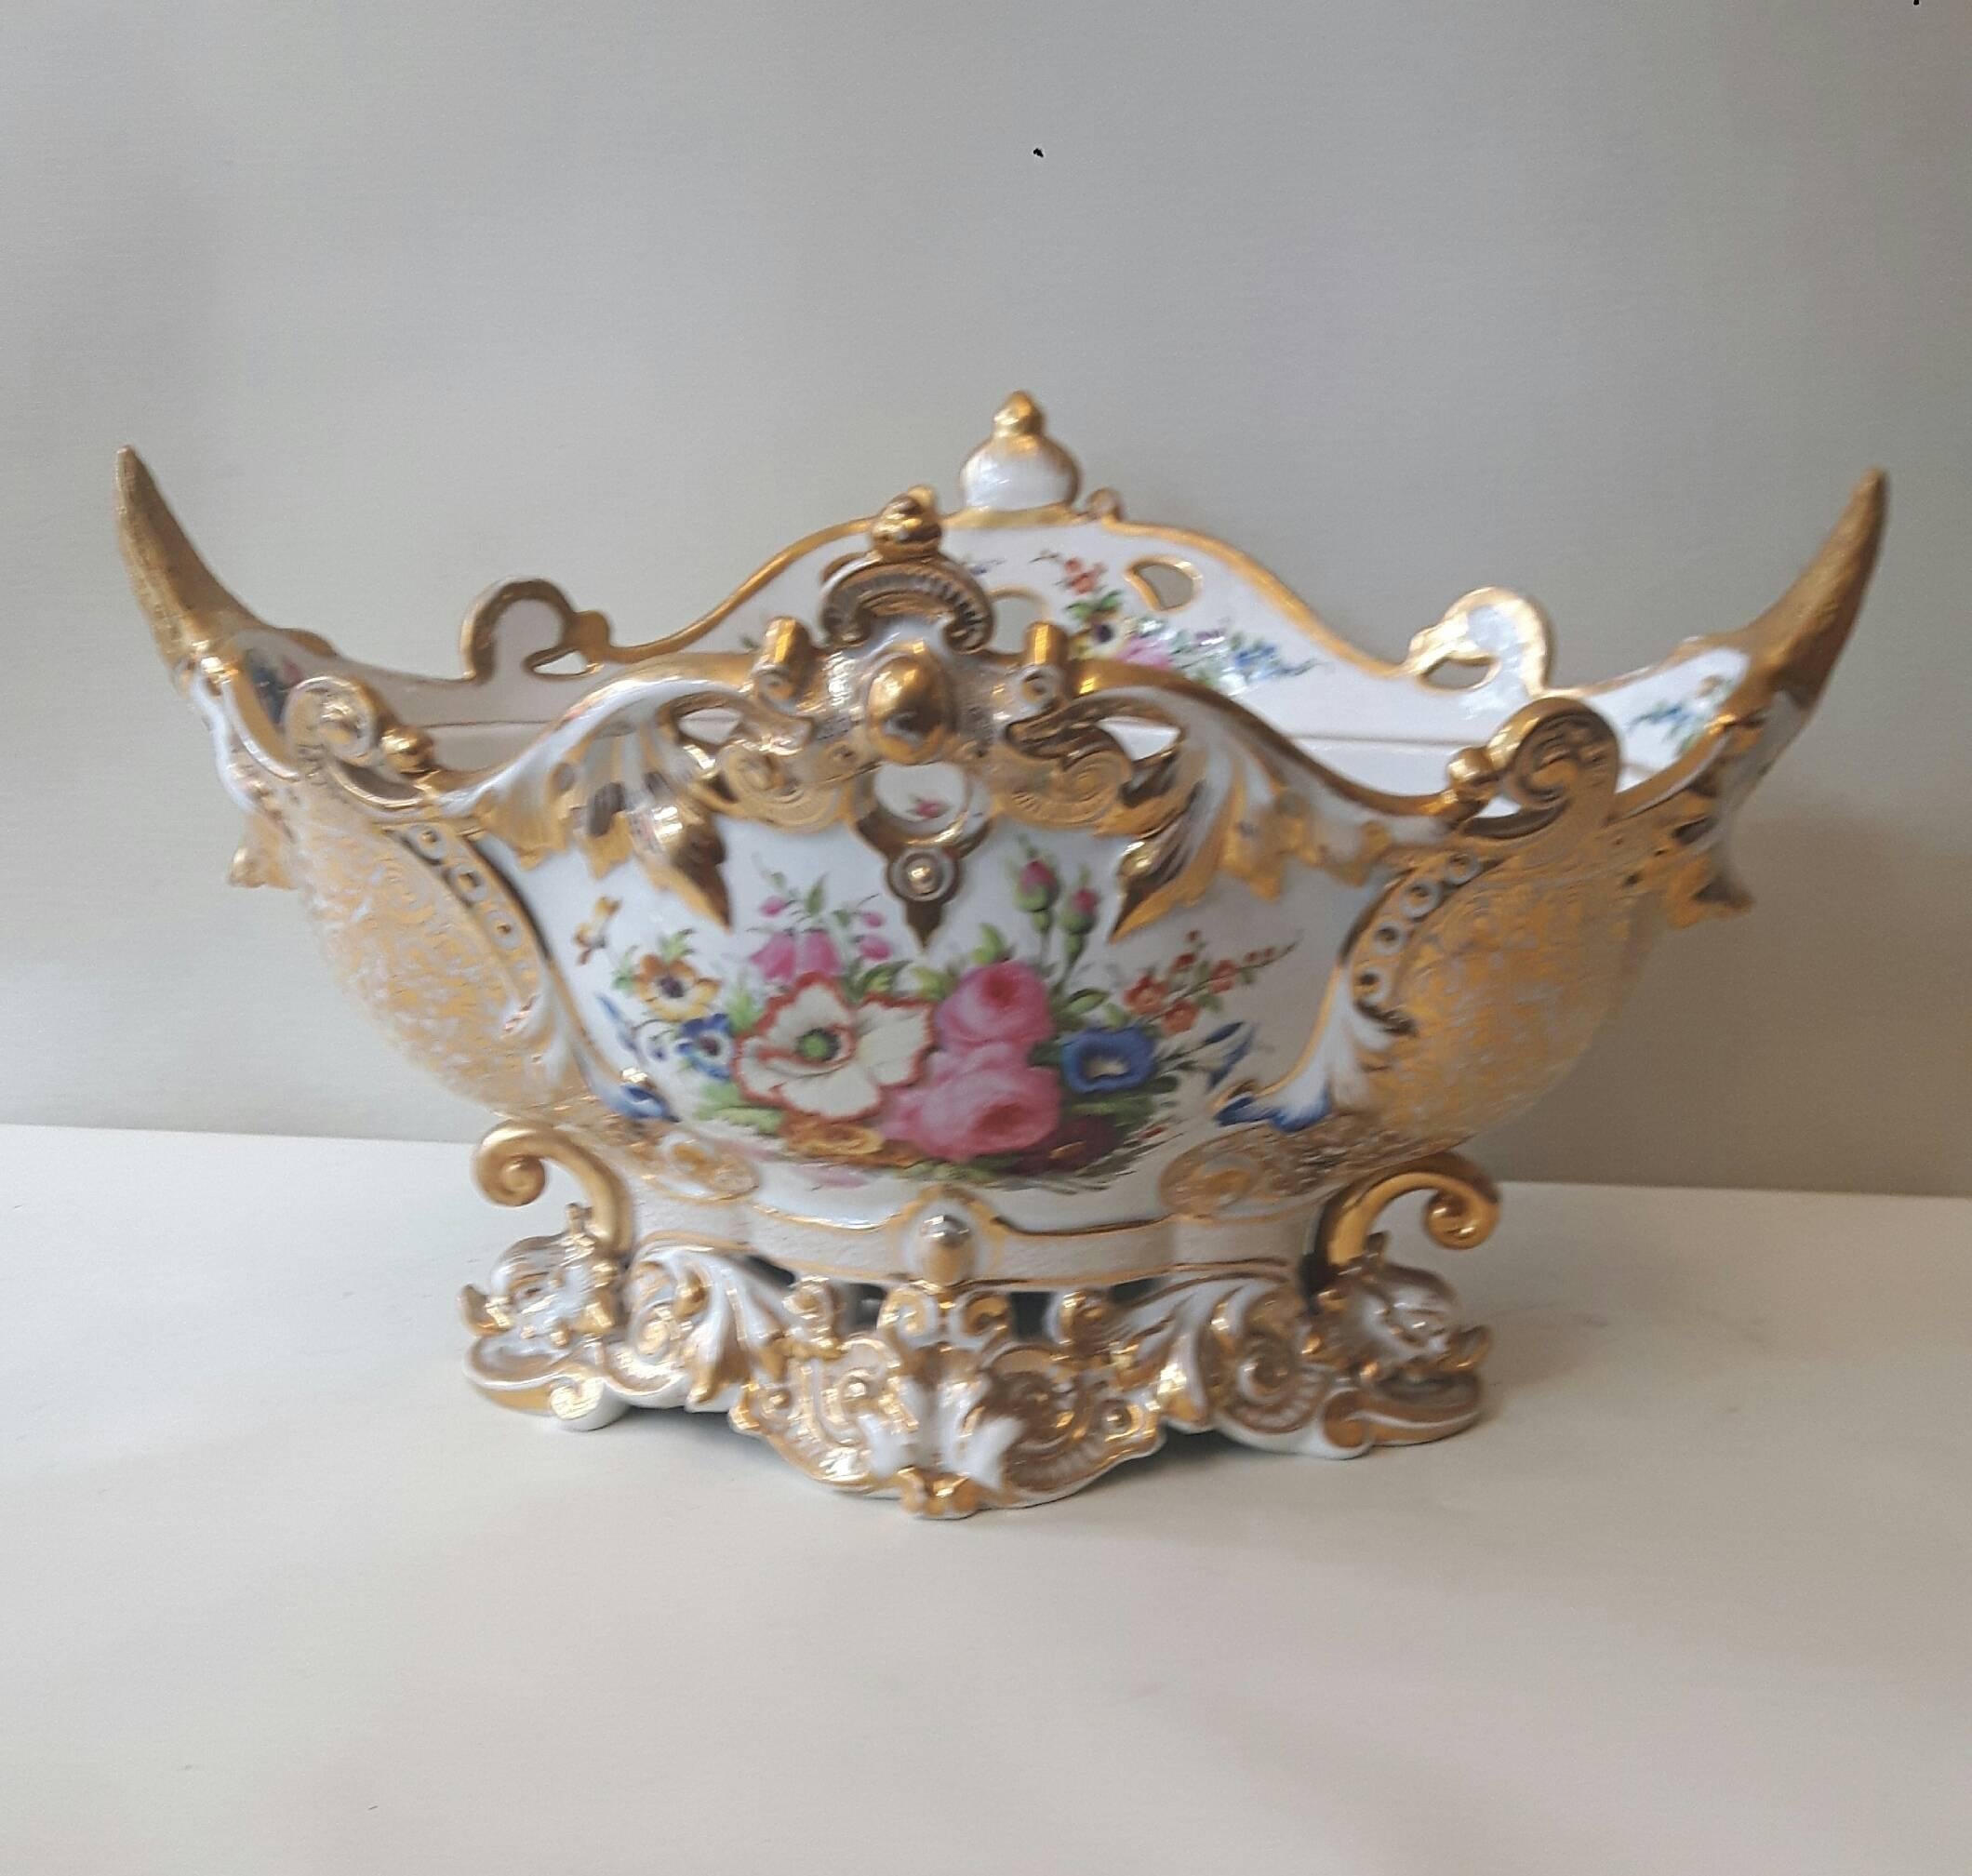 An elegant 19th century Paris porcelain centrepiece, the hand-decorated bowl resting on four gilded dolphin heads with curled tails. The rococo shaped rim is adorned with gilded swan heads and armorial swags. The inside of the centrepiece is loosely